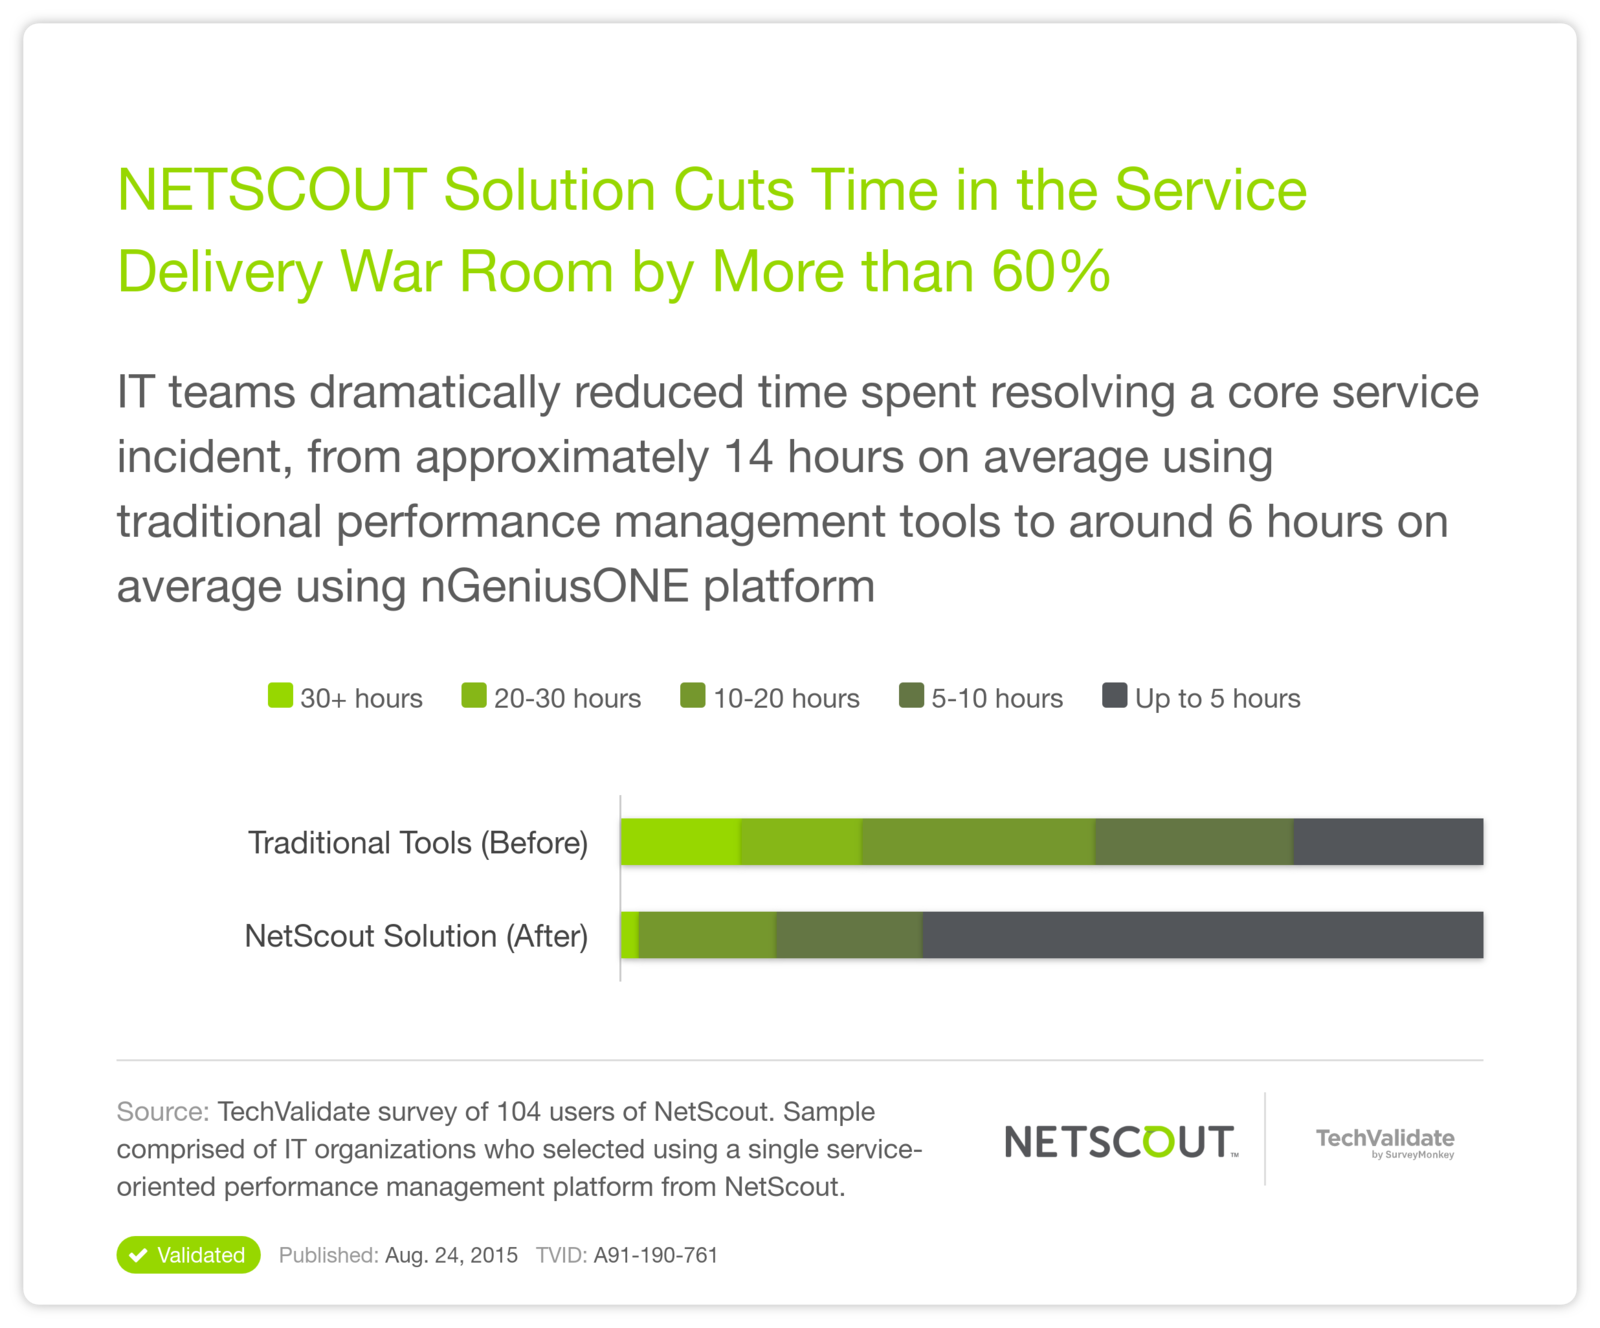 NETSCOUT Solution Cuts Time in the Service Delivery War Room by More than 60%